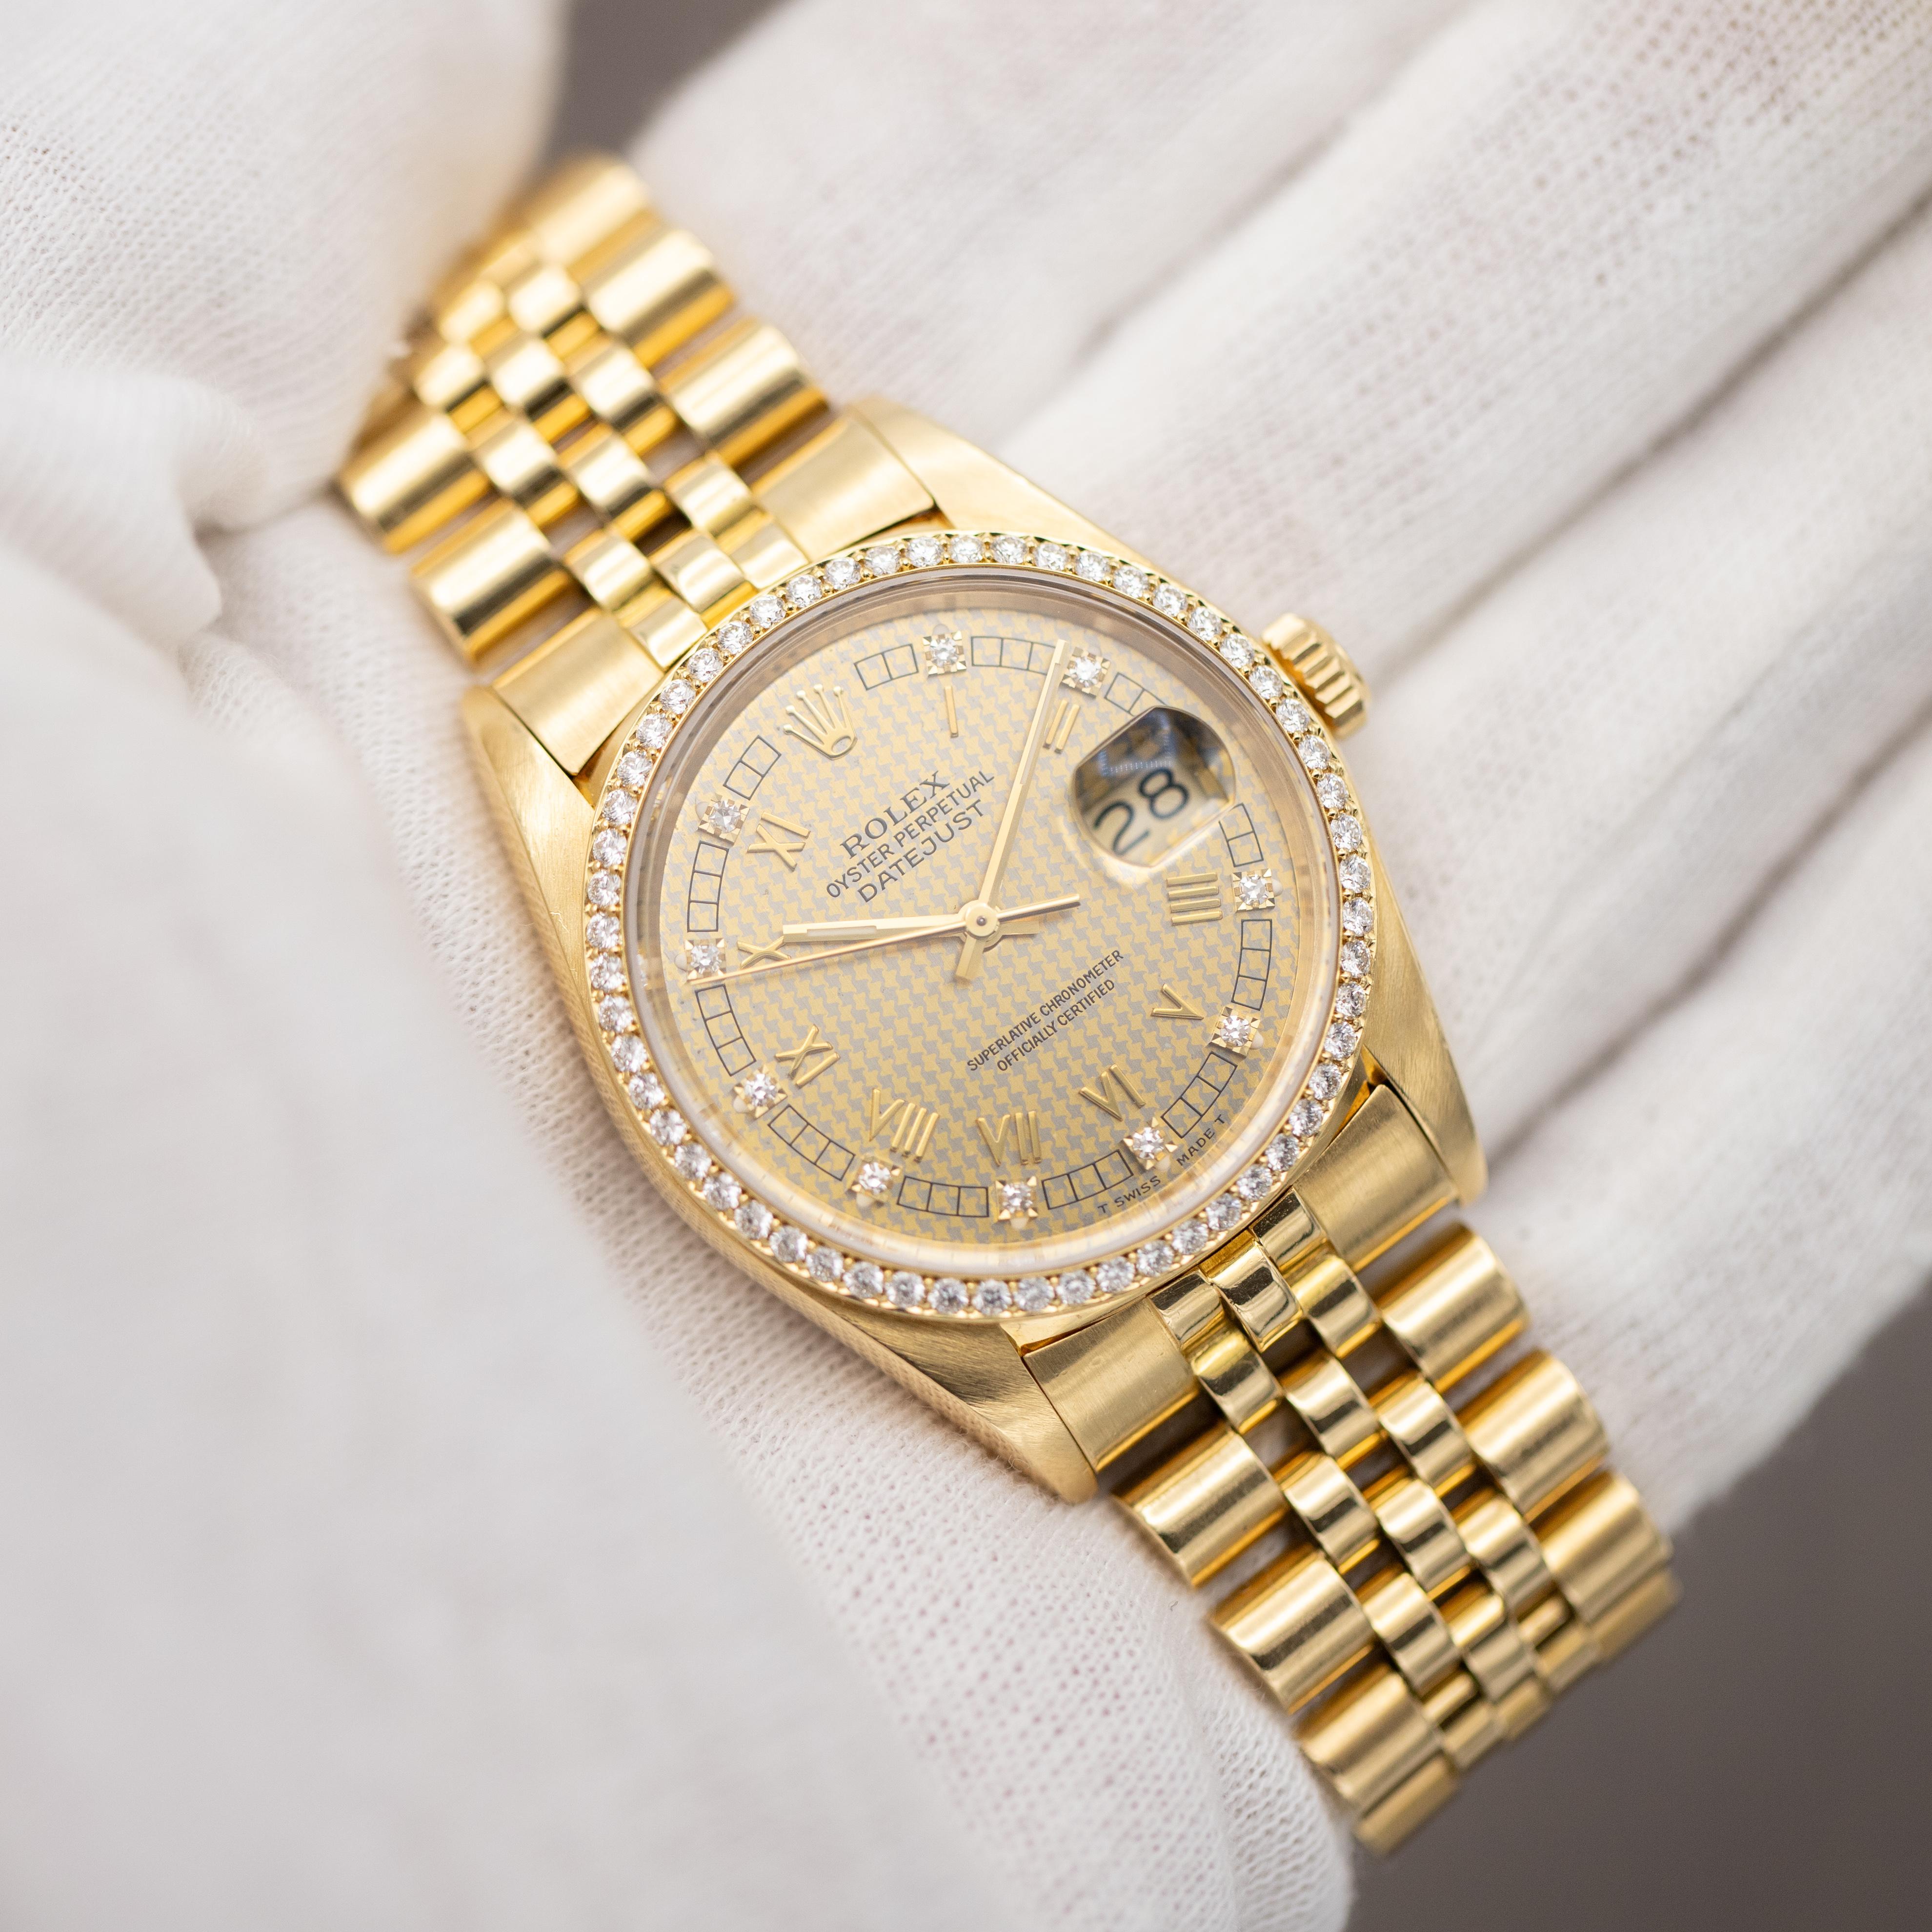 Rolex Datejust 36 - Rare Houndstooth Diamond Dial, Vintage 18k Yellow Gold watch 6